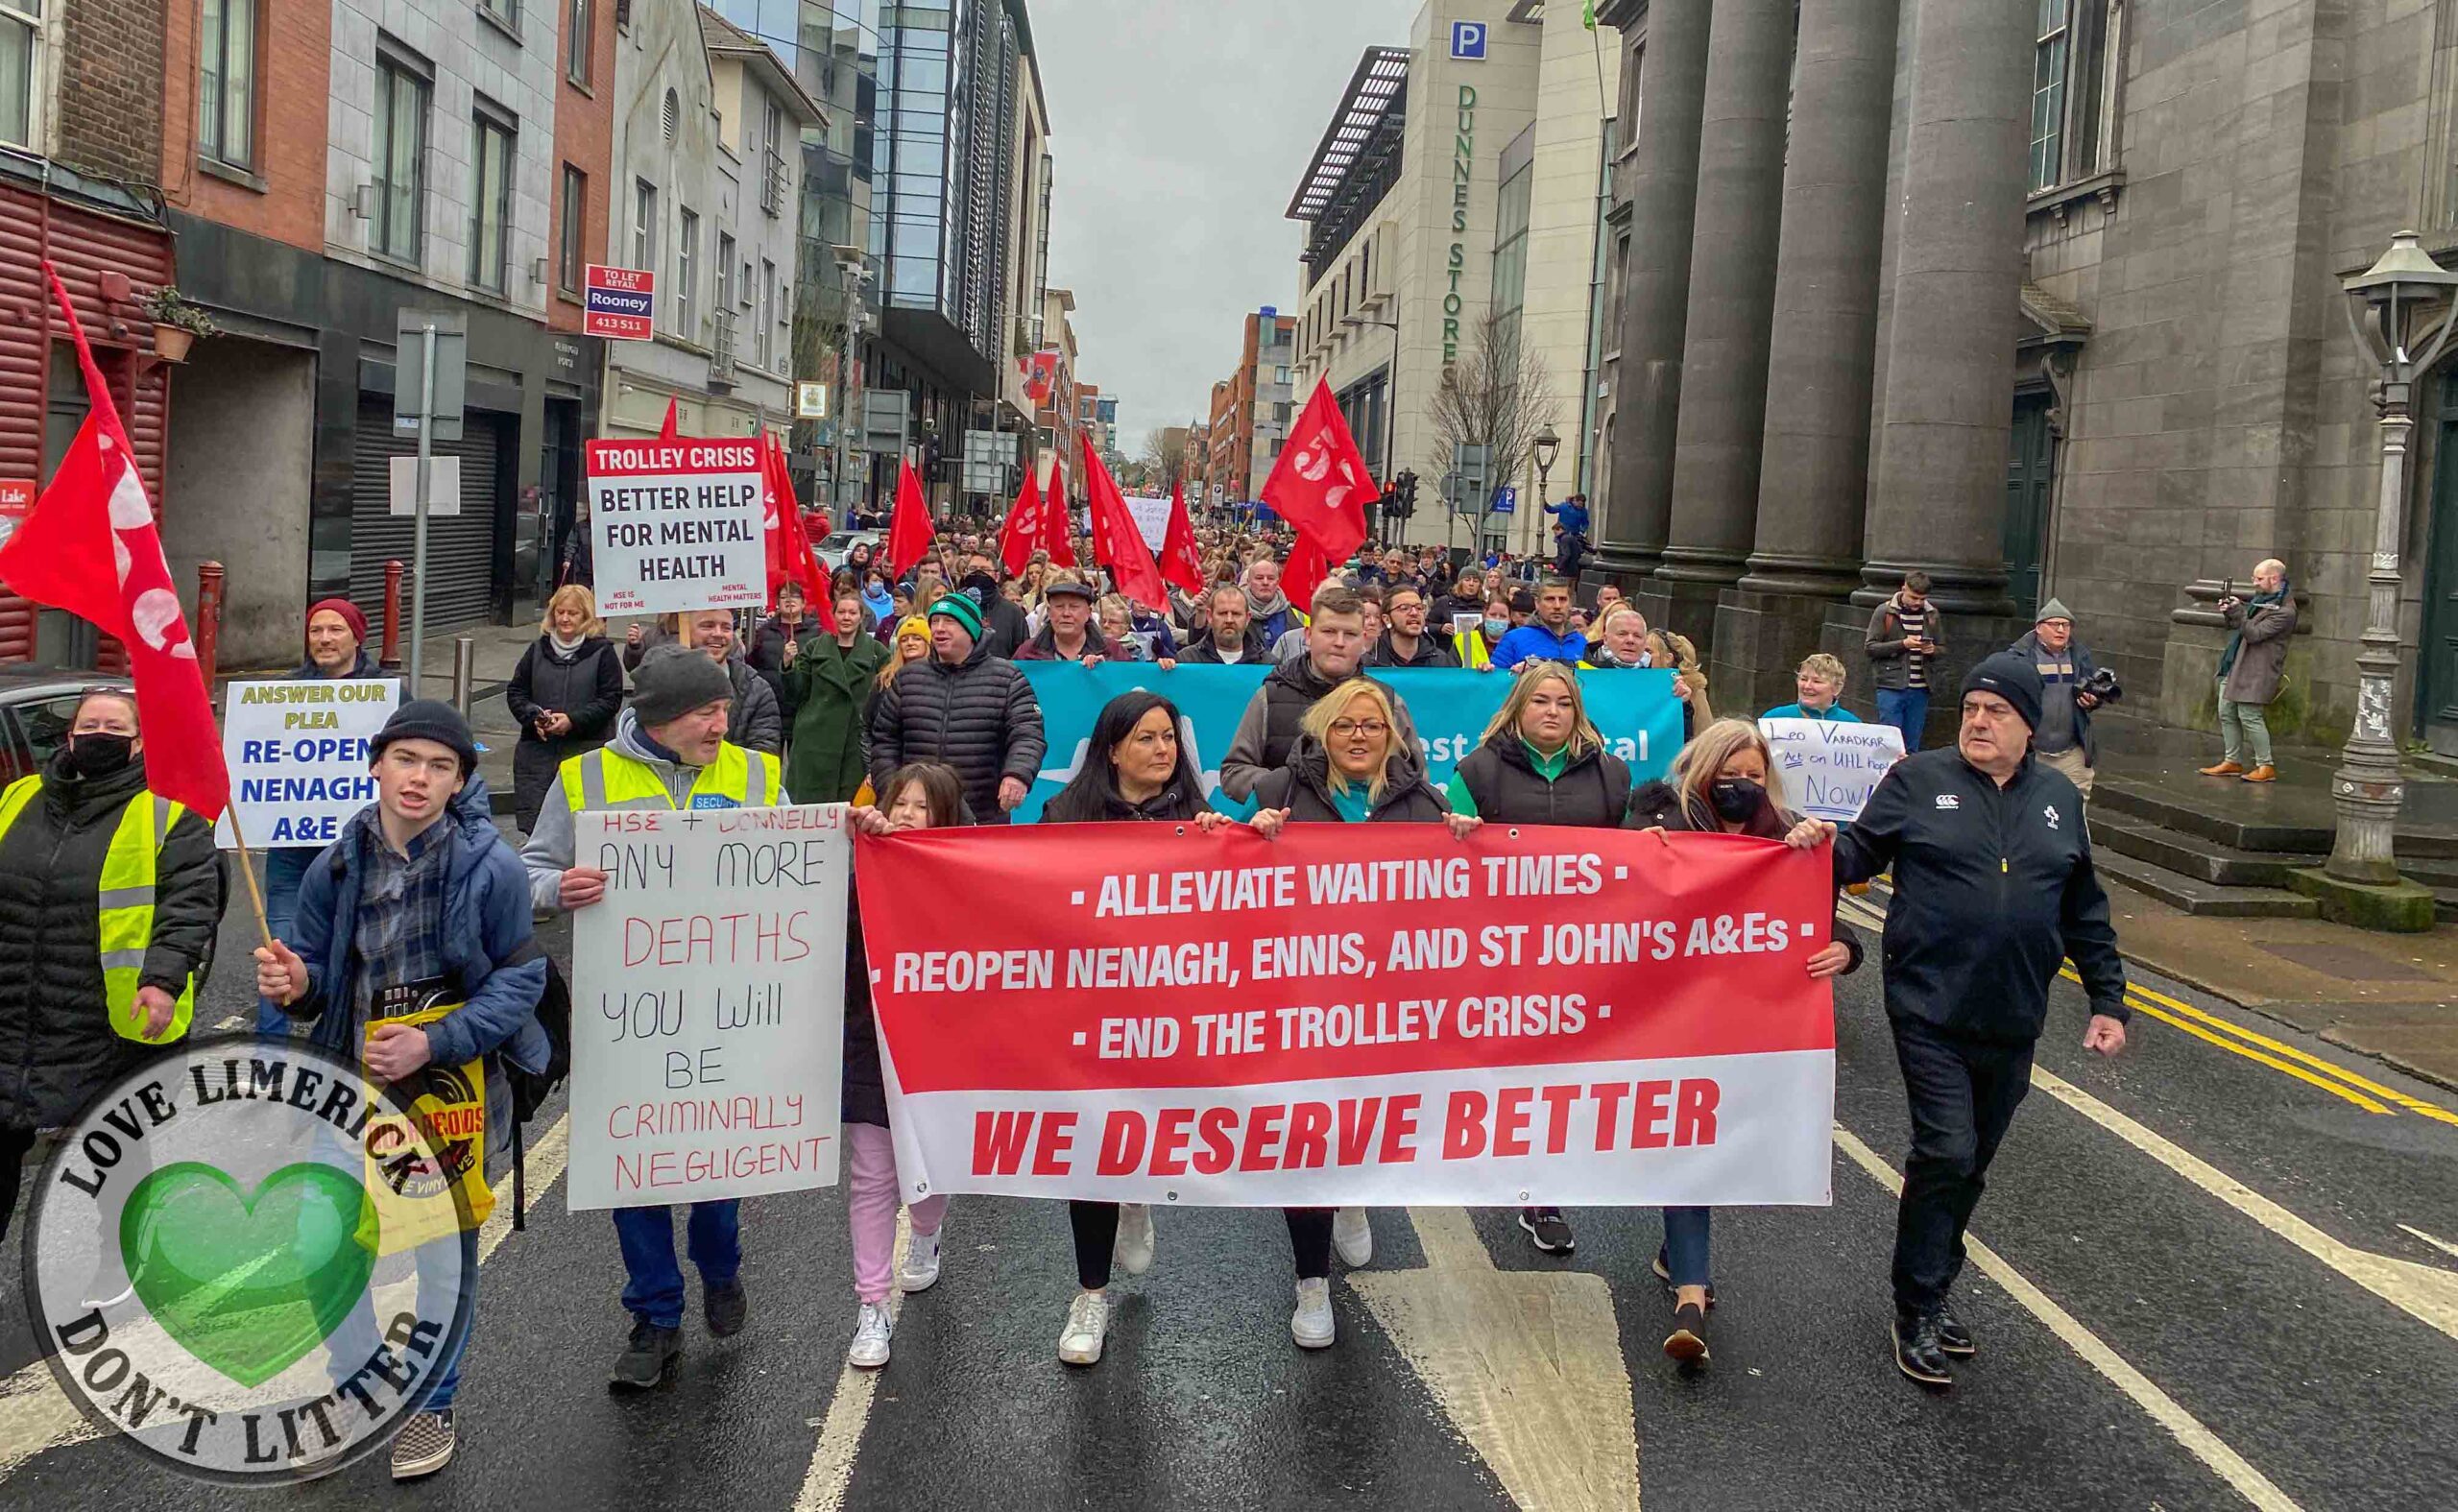 March for Limerick! Thousands march through Limerick city for UHL protest